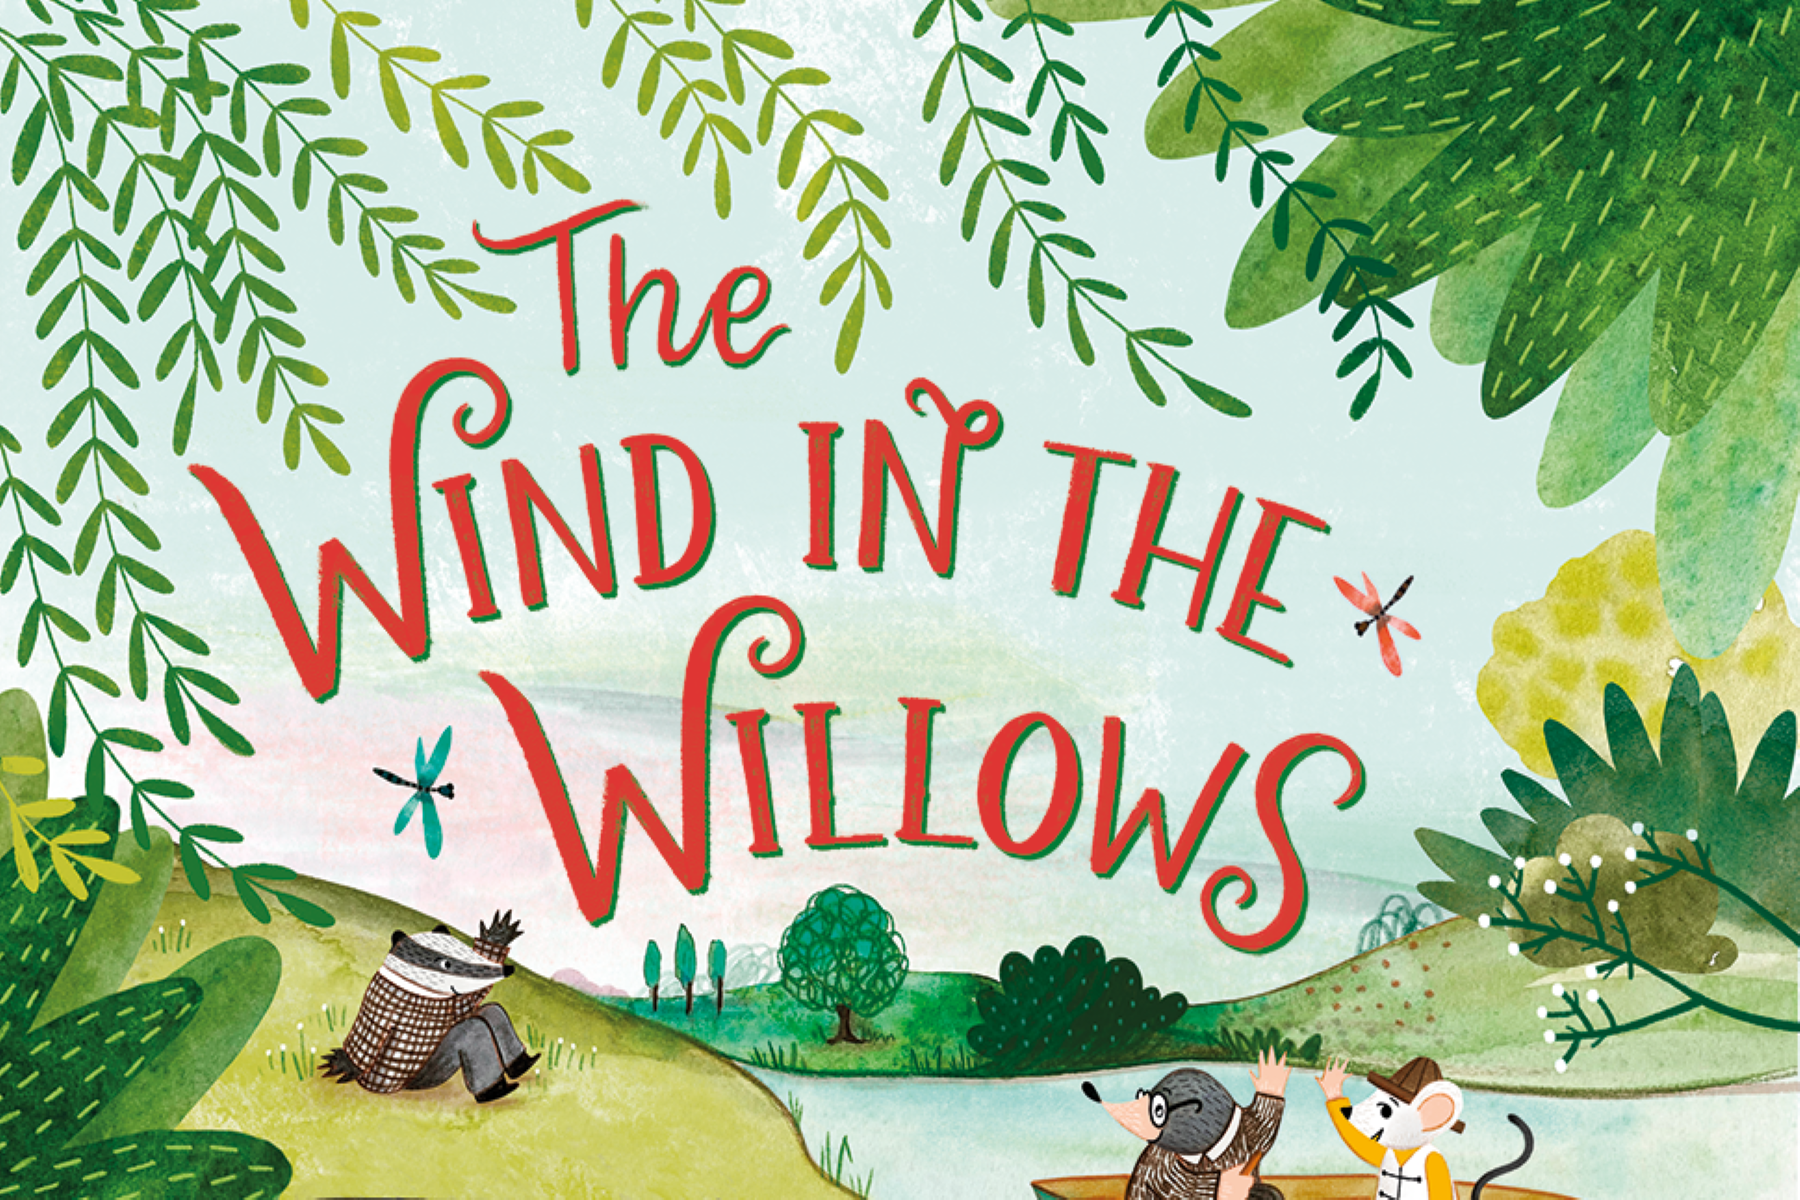 An image featuring typography of The Wind in the Willows against an illustration showing a river and Badger, Ratty and Mole